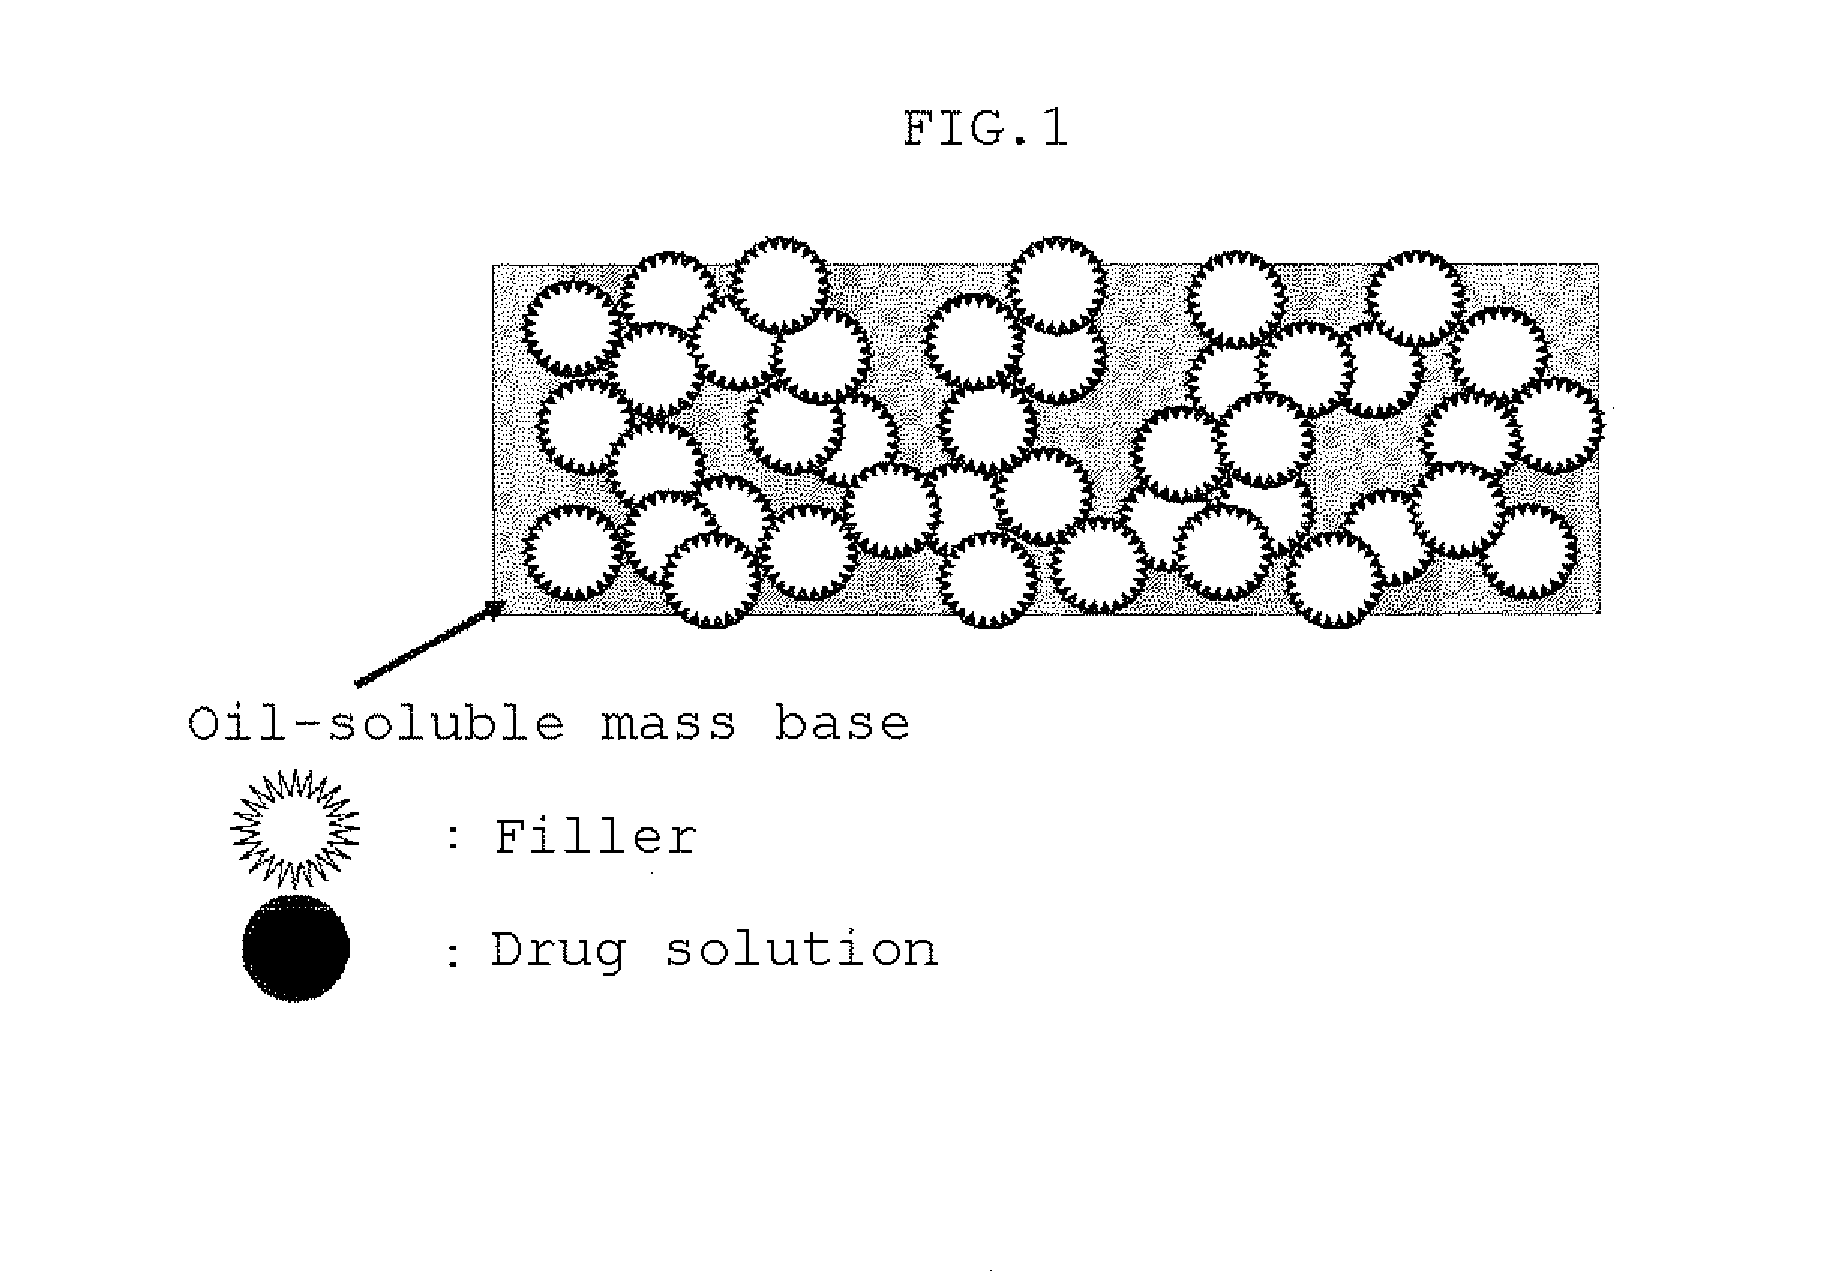 Composition for Patch Preparation Comprising Drug, Organic Solvent, Lipophilic Mass Base, and Powder